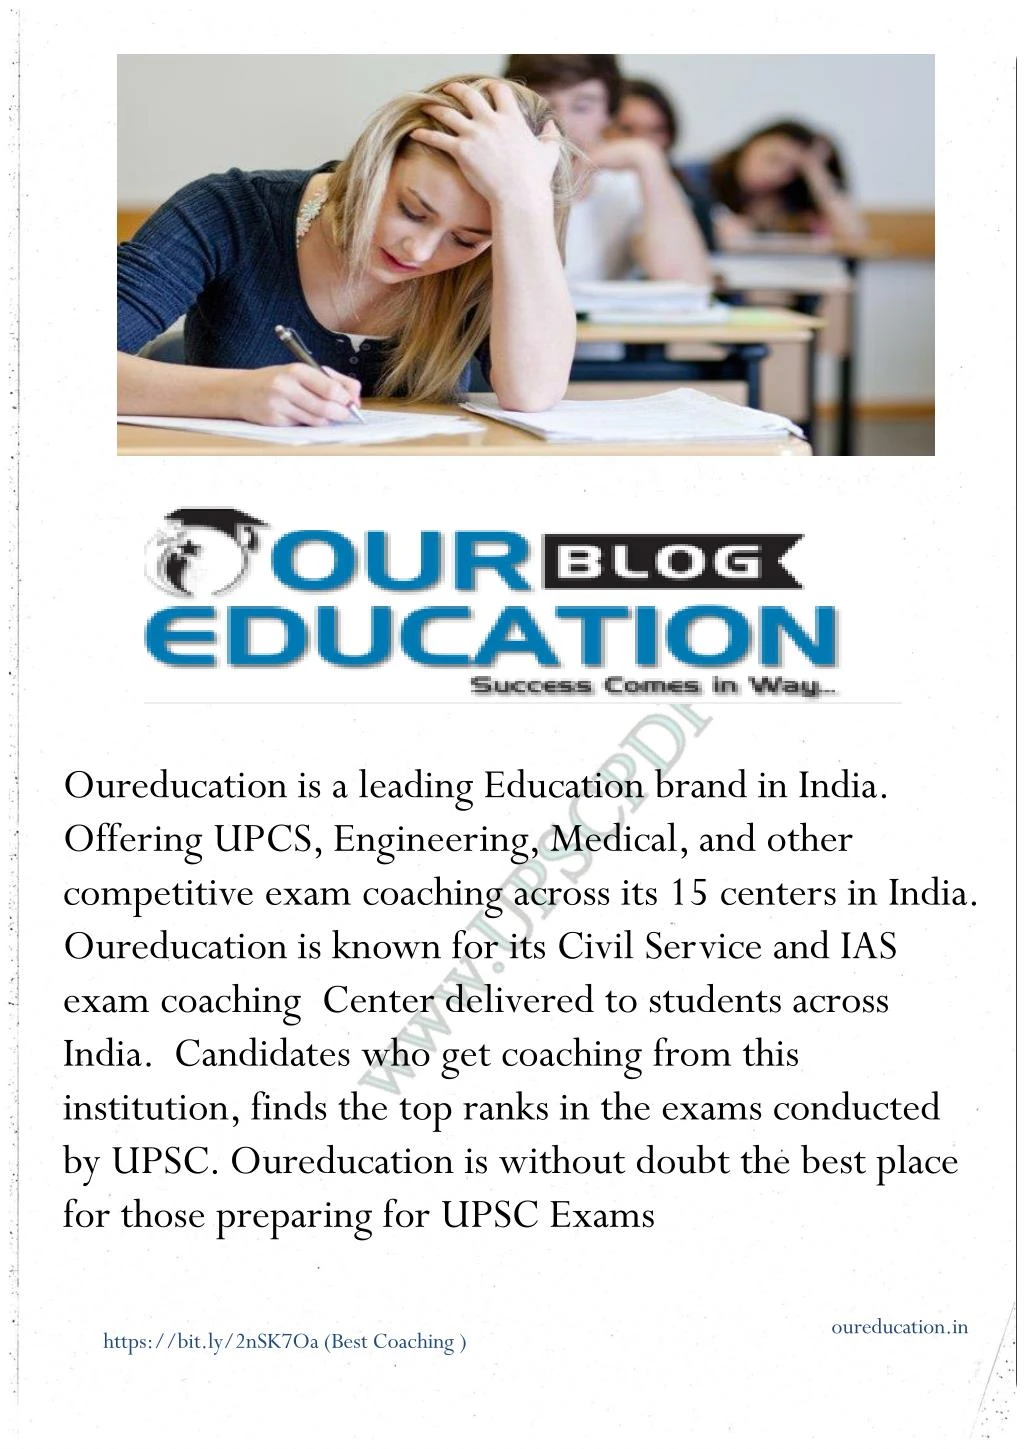 oureducation is a leading education brand